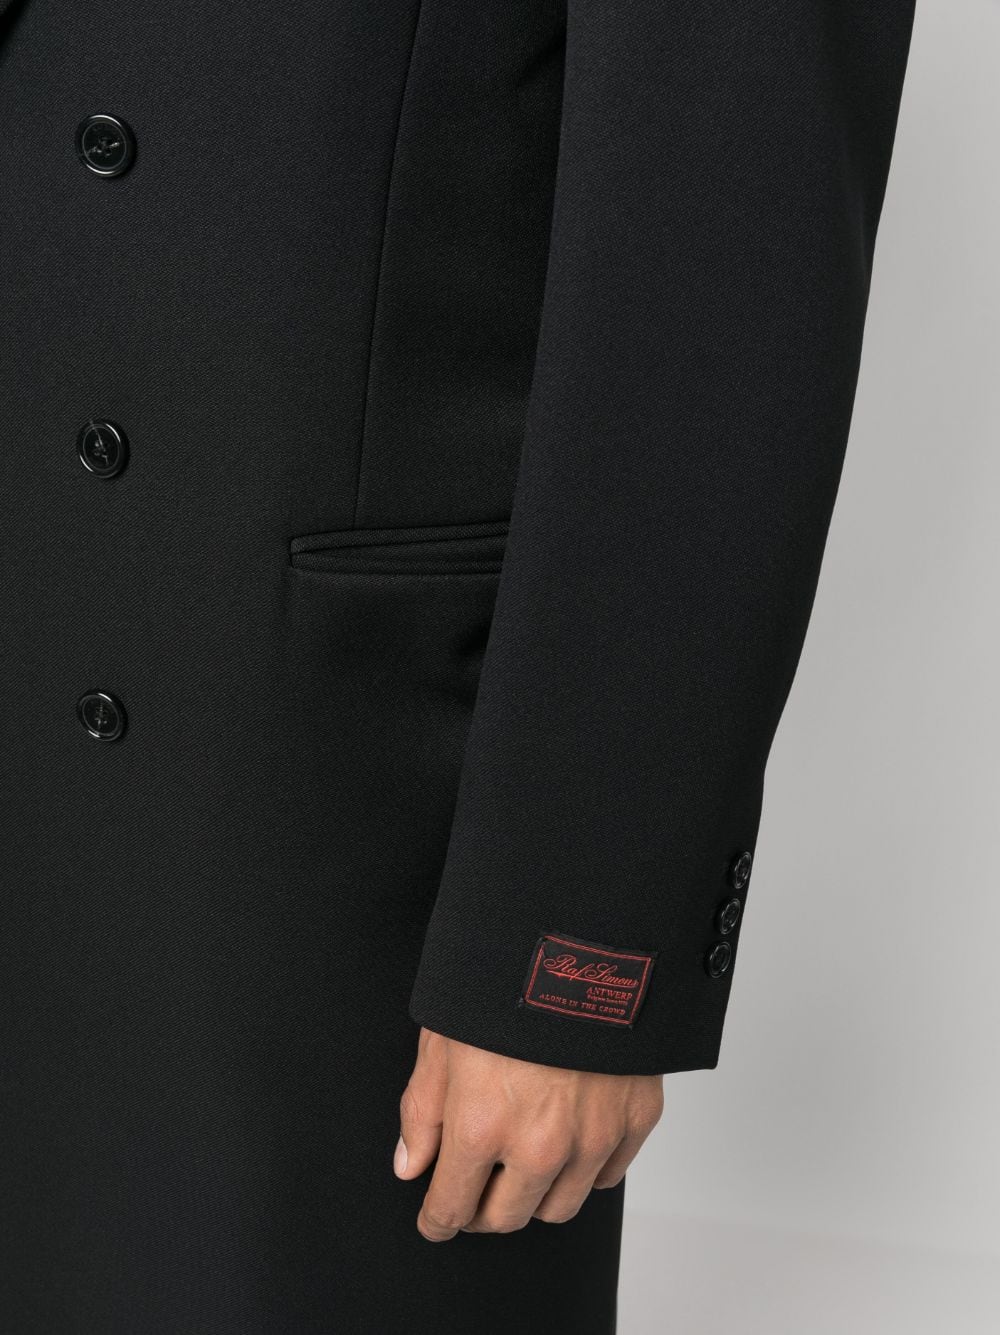 Raf Simons double-breasted Coat - Farfetch